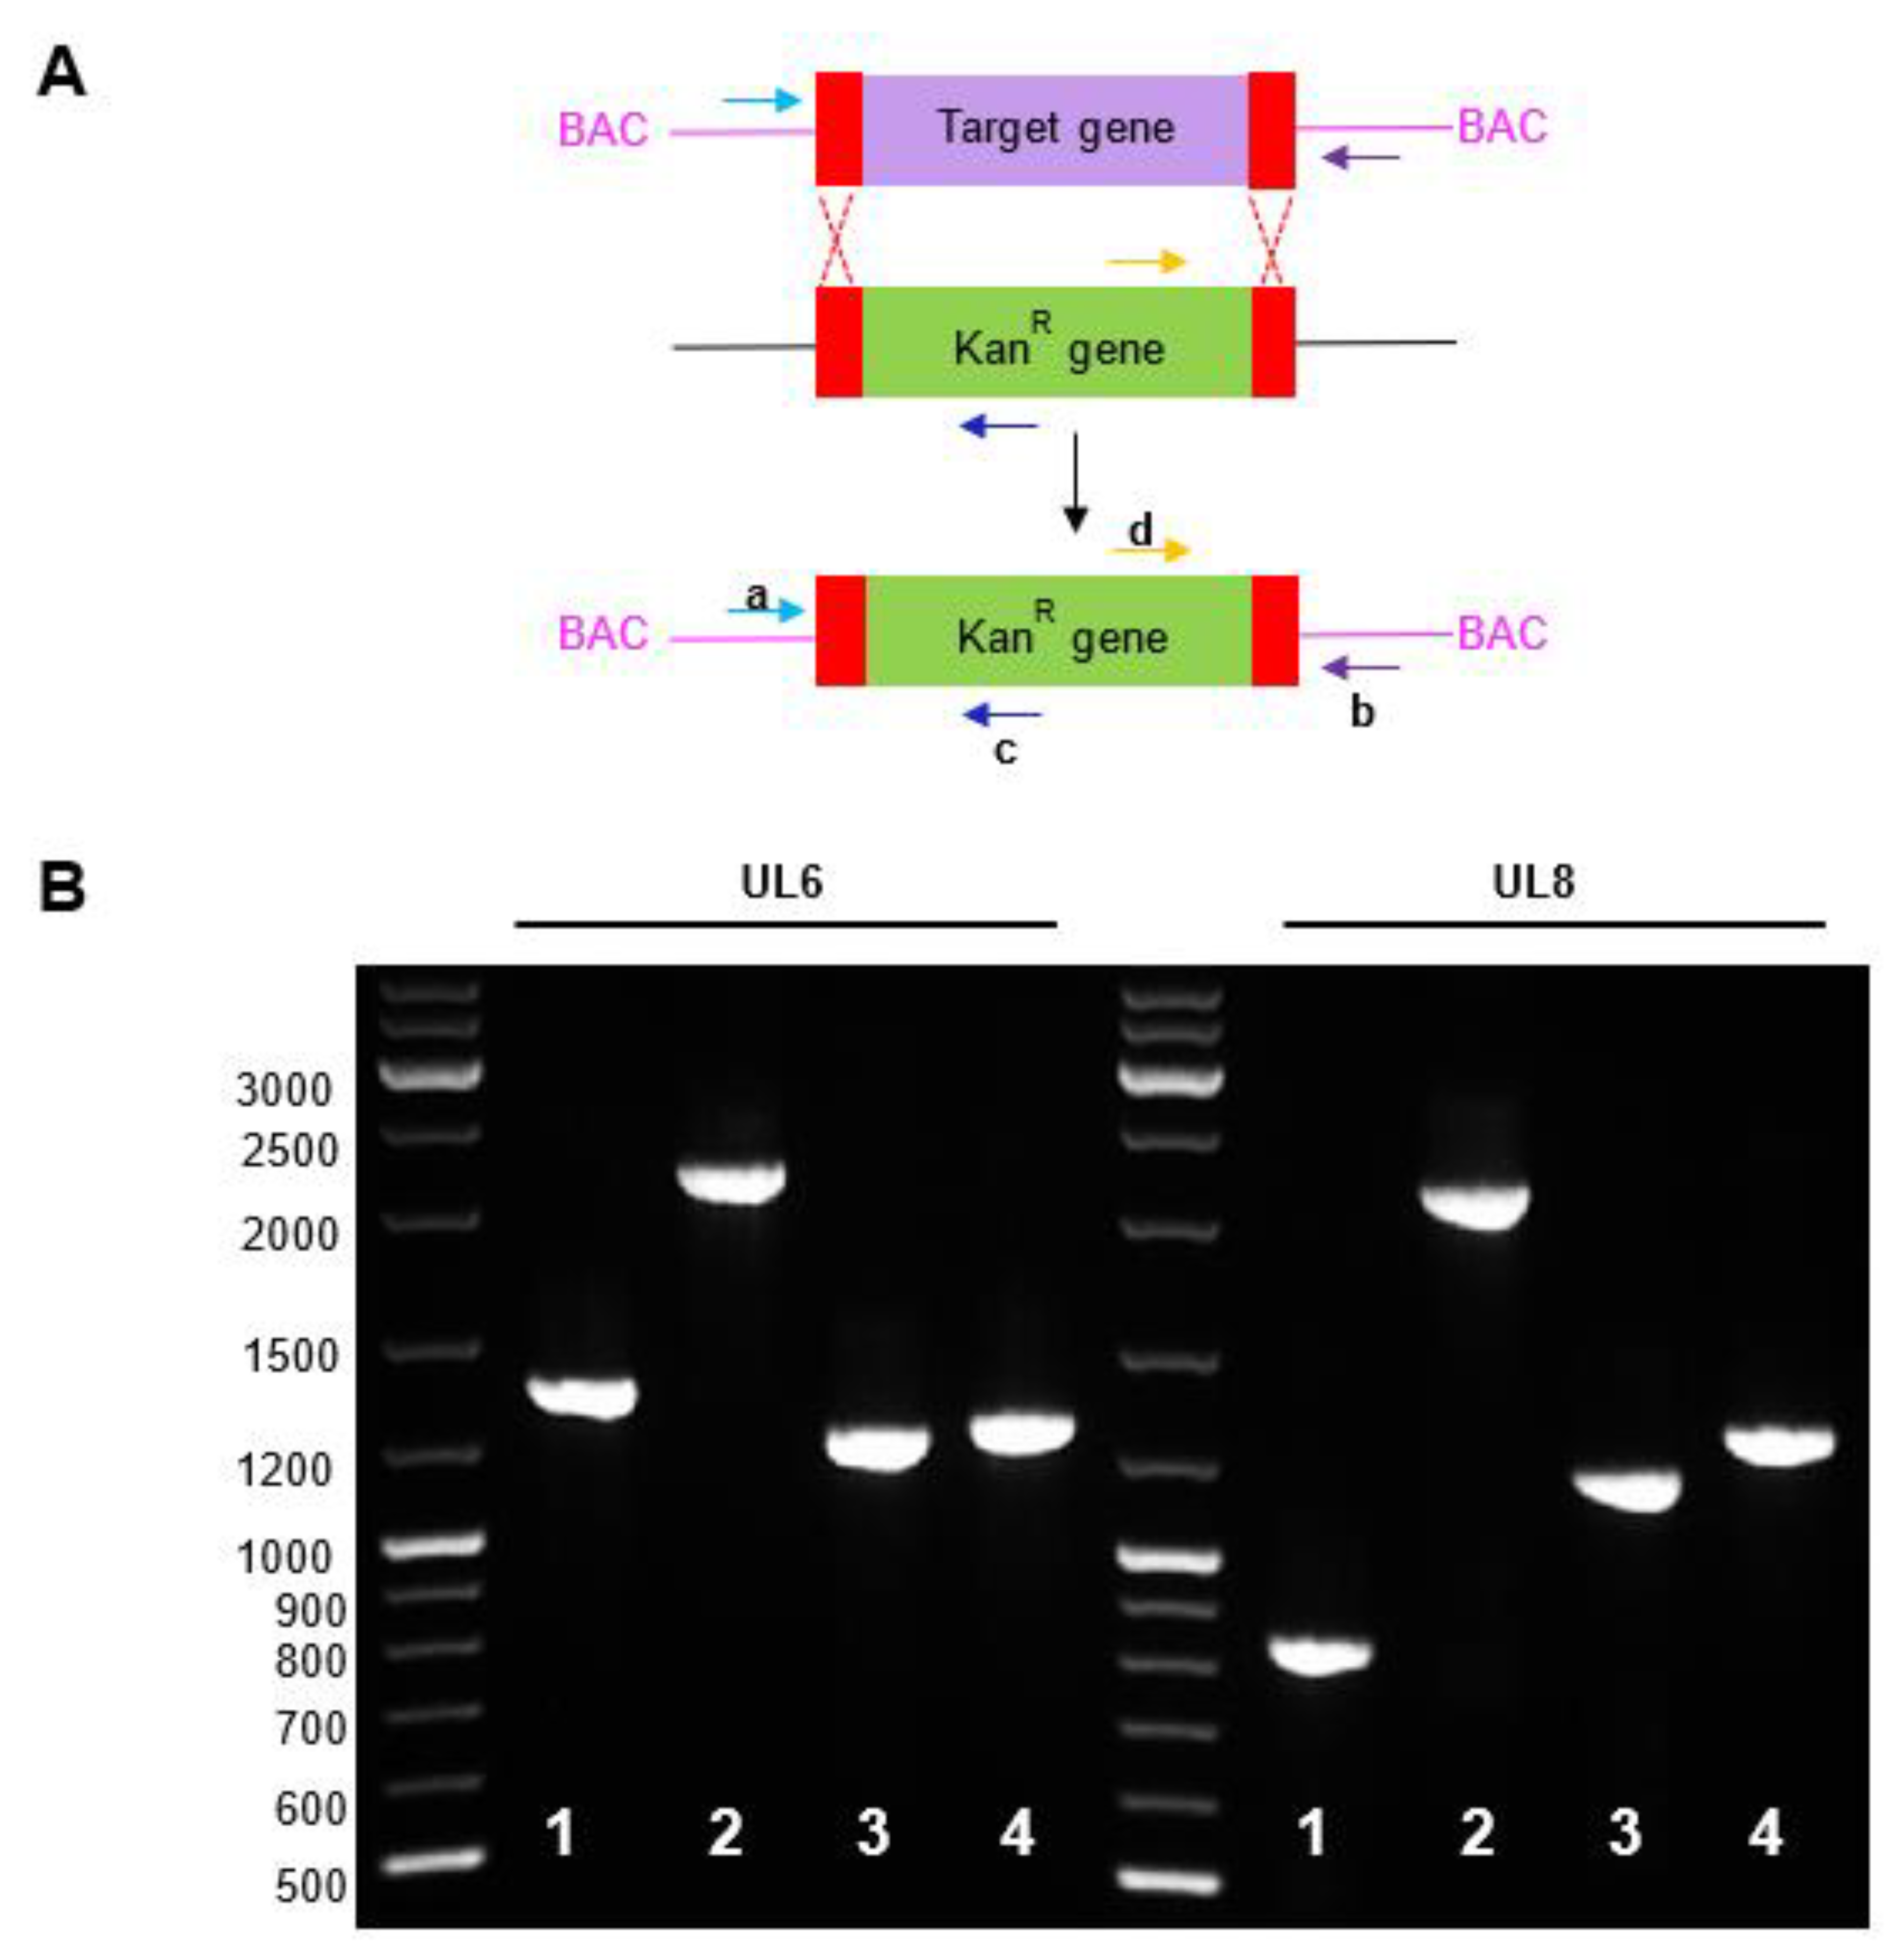 Bugt Demokrati jogger IJMS | Free Full-Text | Optimization of a Lambda-RED Recombination Method  for Rapid Gene Deletion in Human Cytomegalovirus